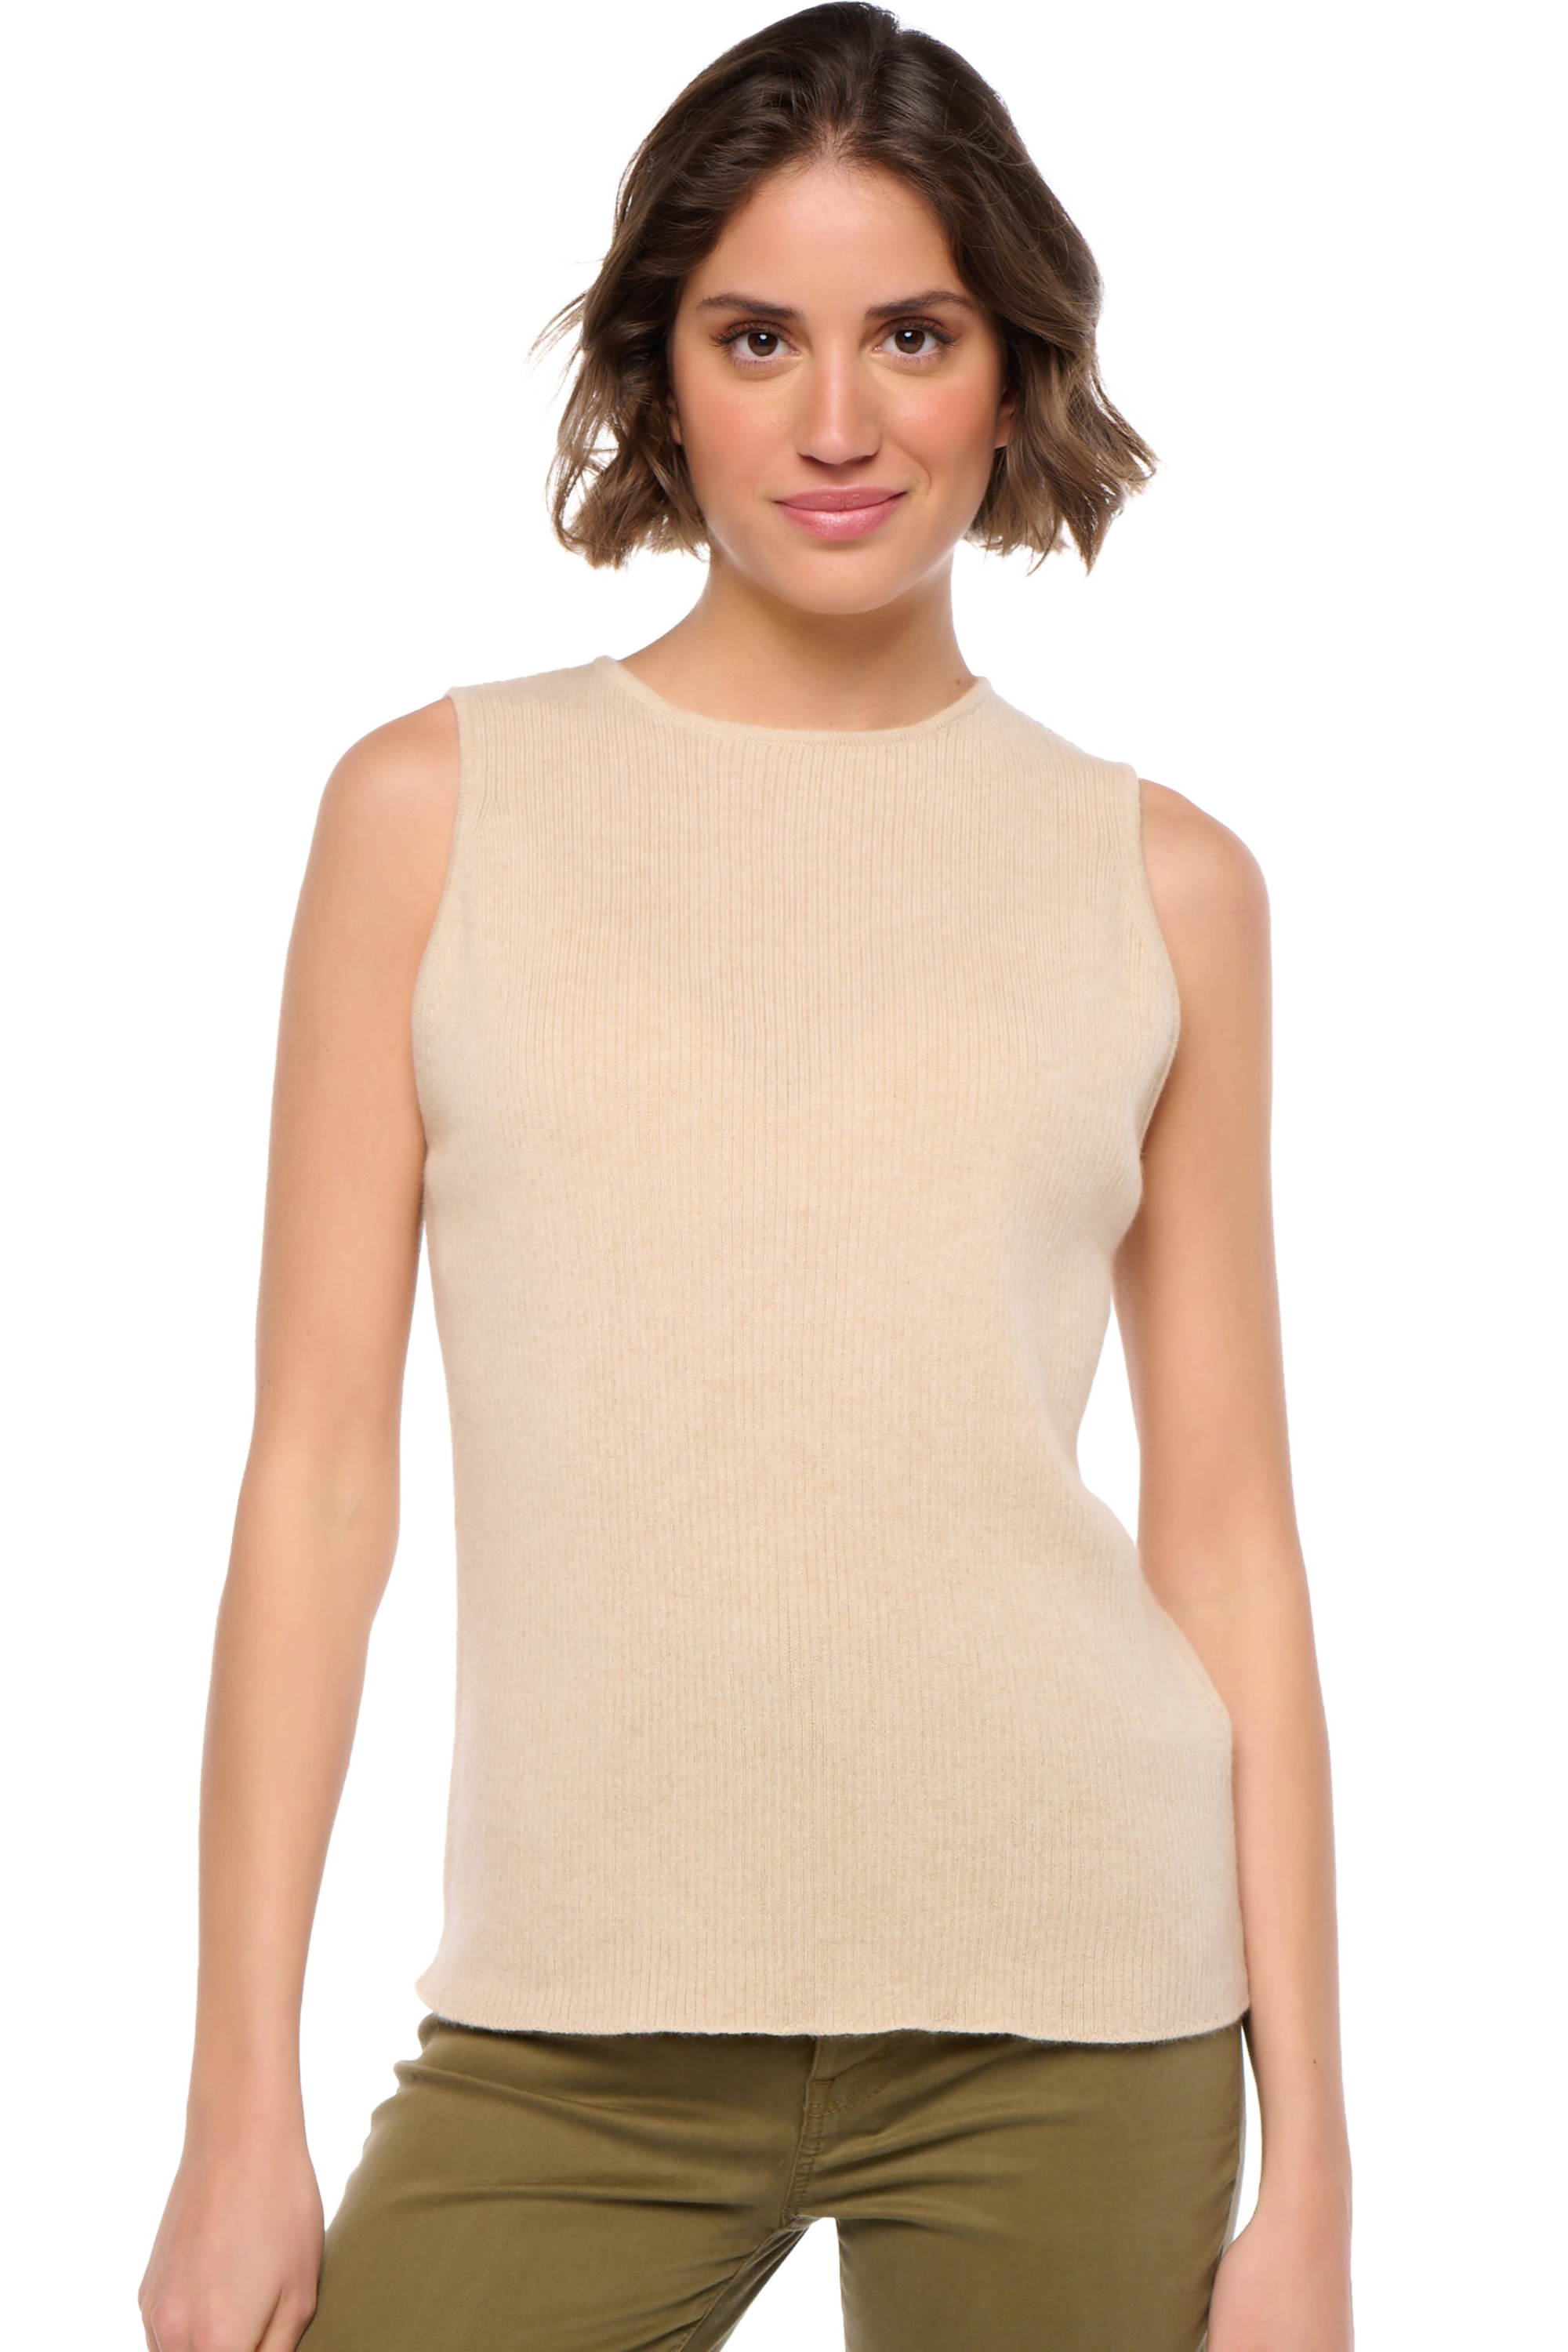 Cachemire pull femme col rond vuppia natural beige s